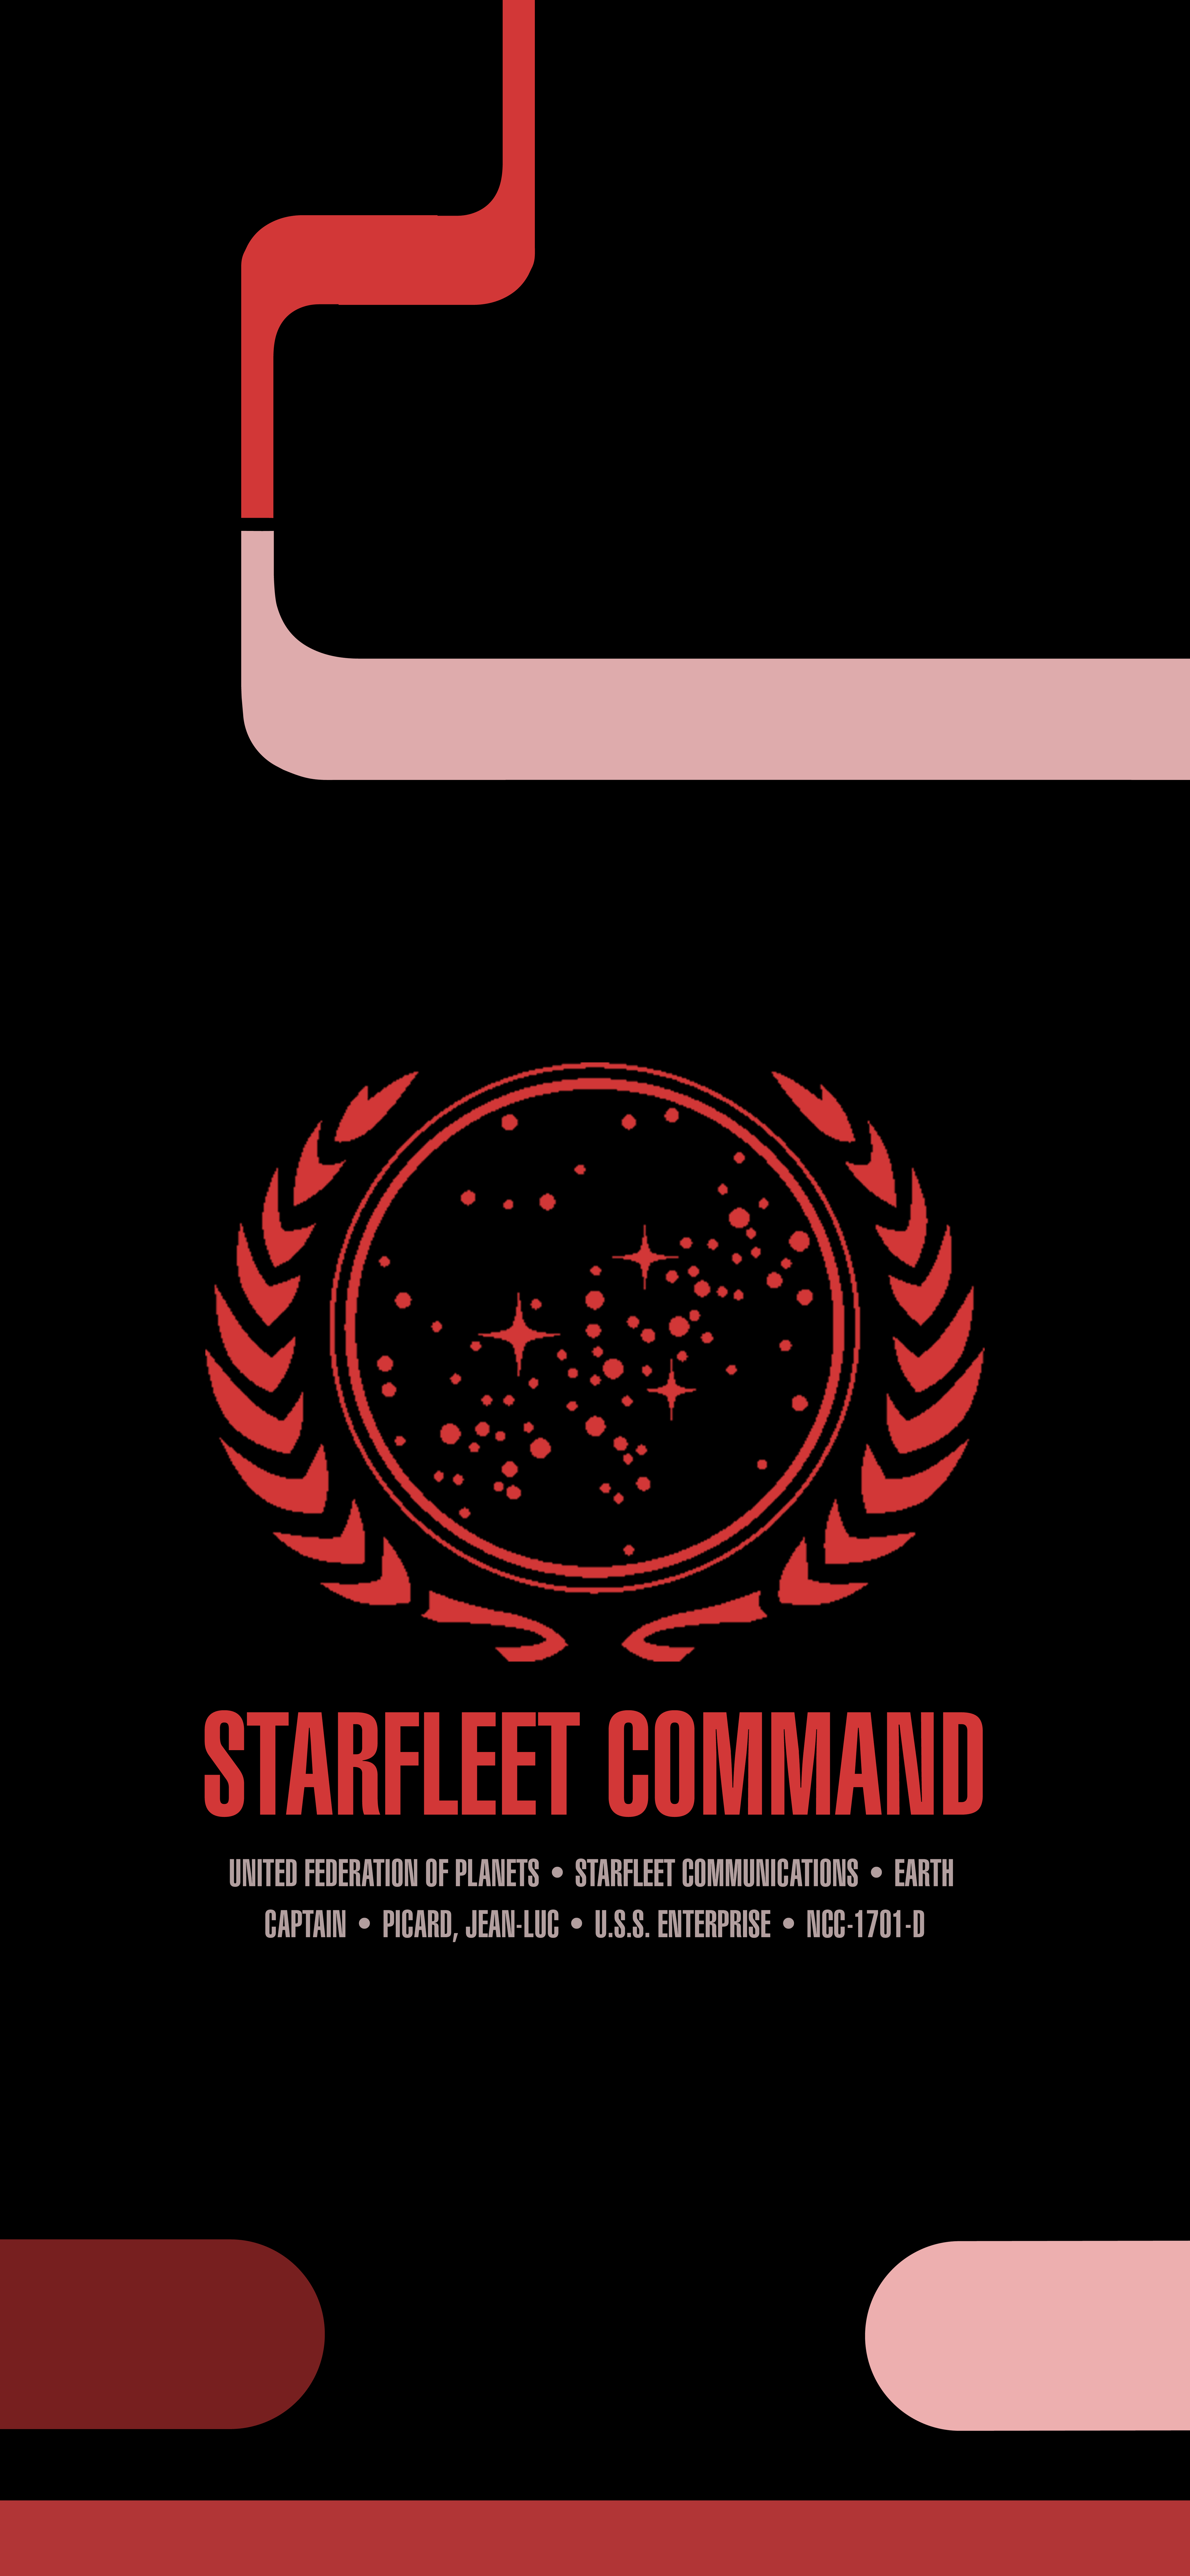 As requested by Starfleet Command, I